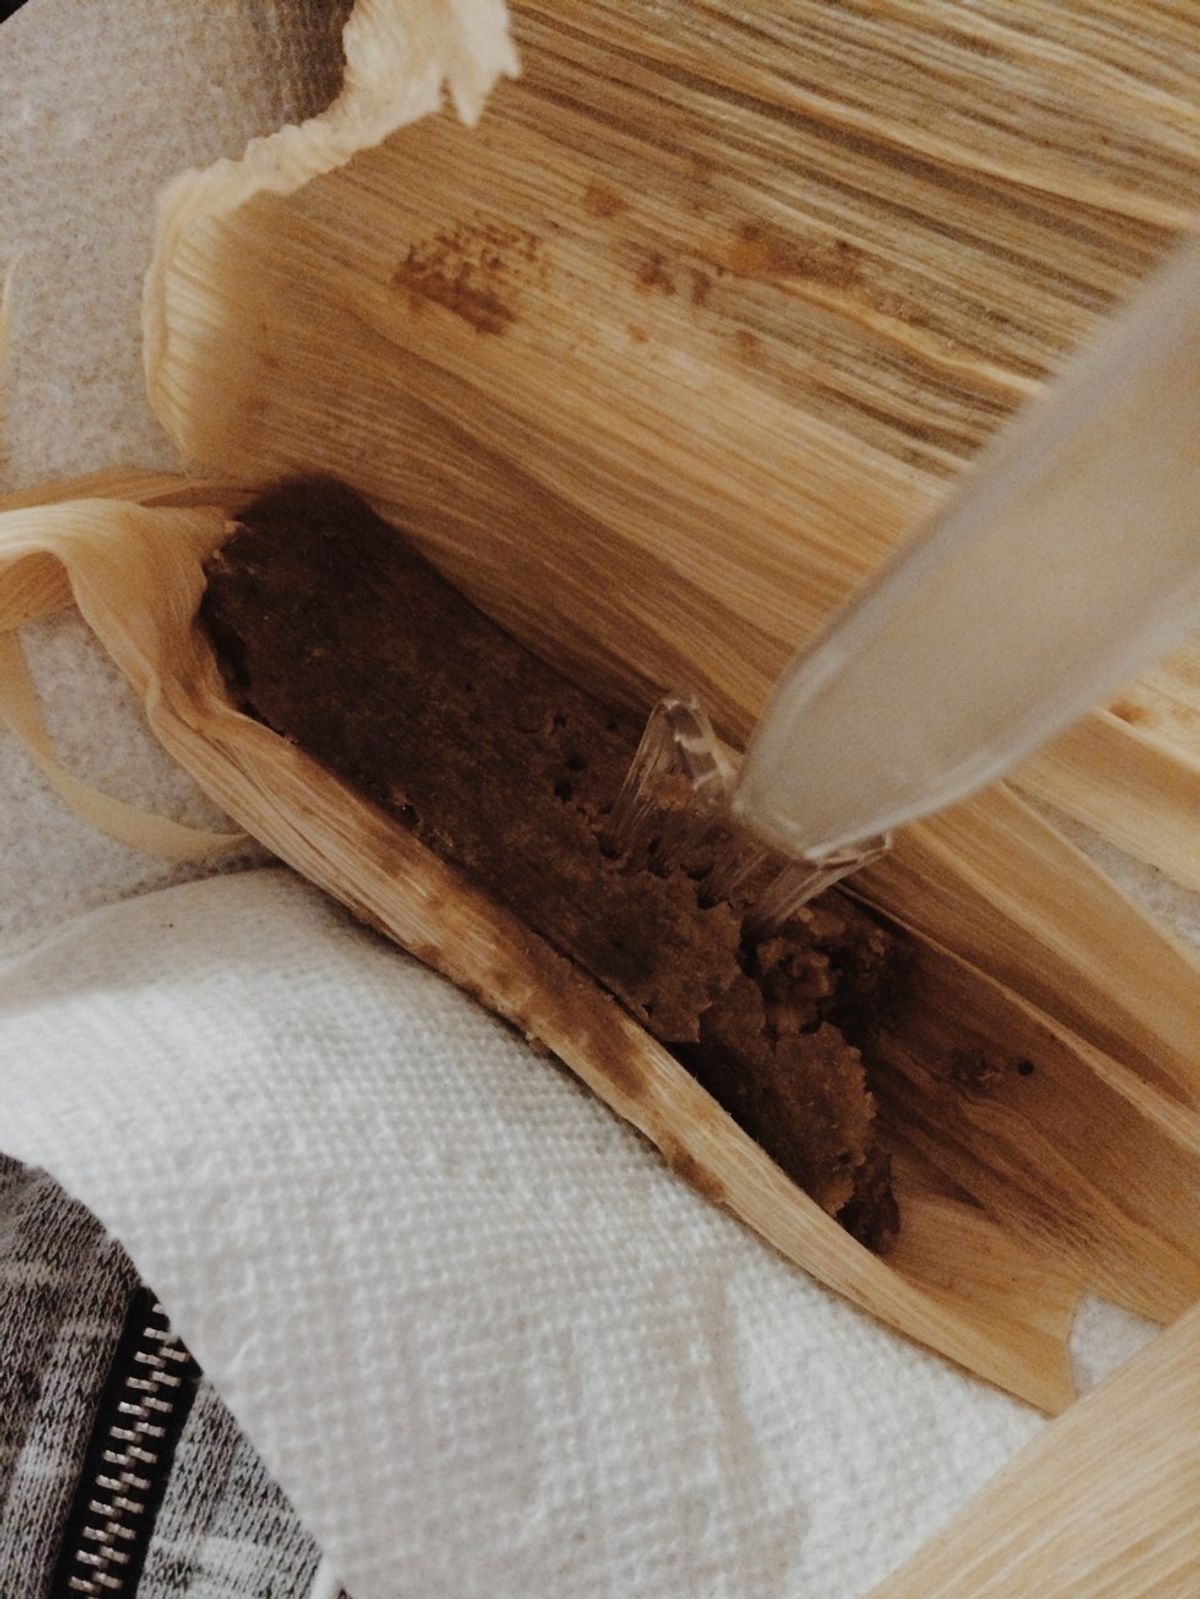 Looking Forward To That Tamale At The End Of The Day